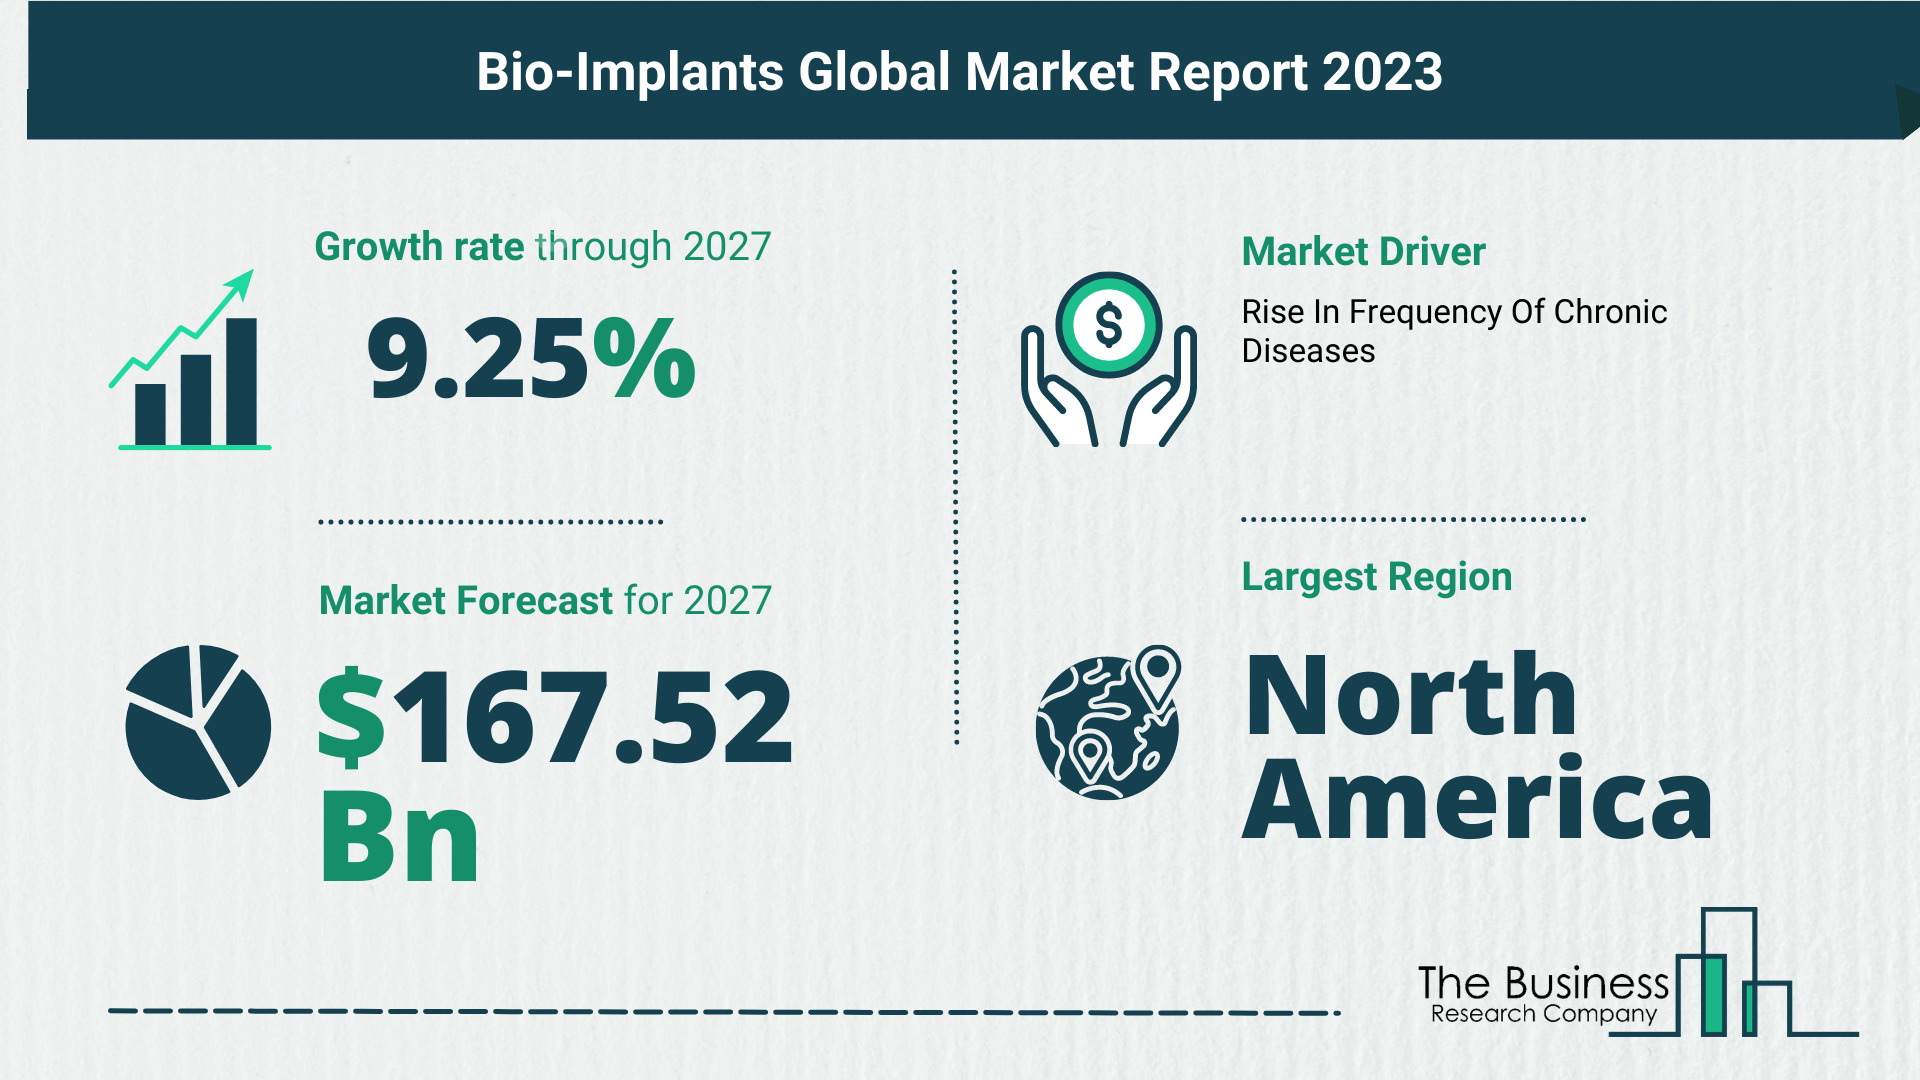 What Is The Forecast Growth Rate For The Bio-Implants Market?